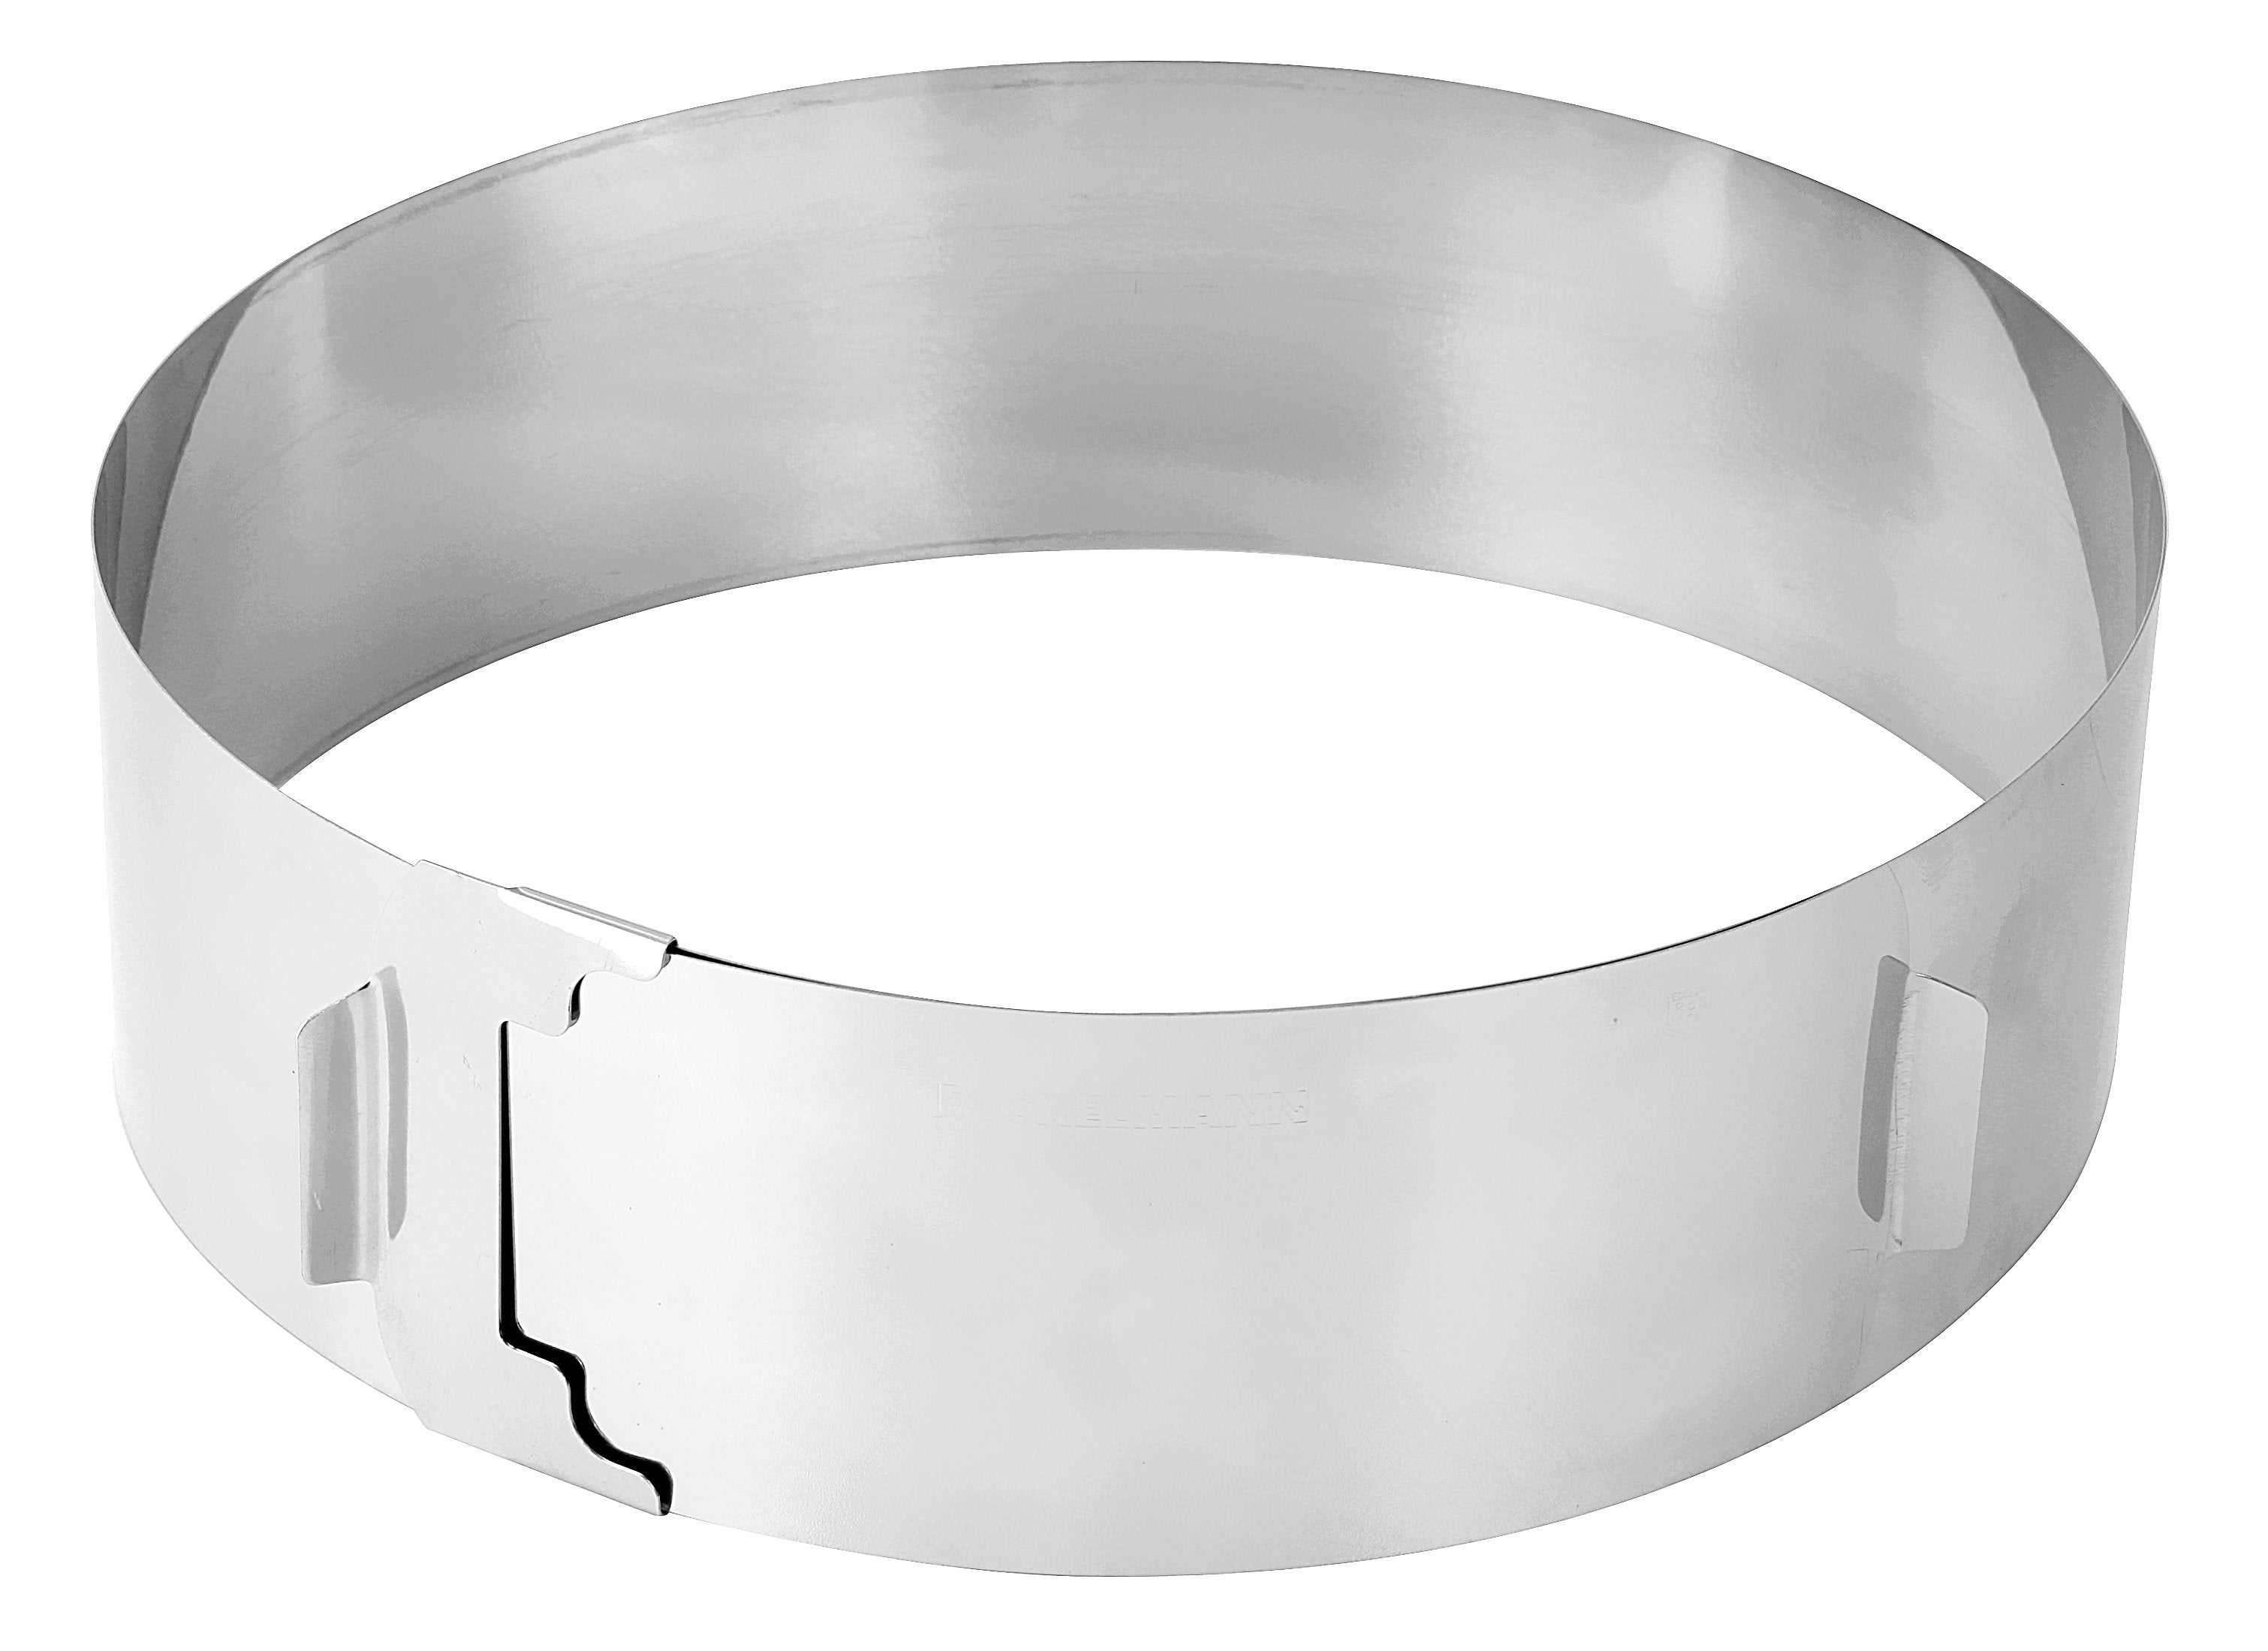 Zenker Cake Ring With Handles, "Patisserie", Stainless Steel, 15-30X7.5 Cm - Whole and All